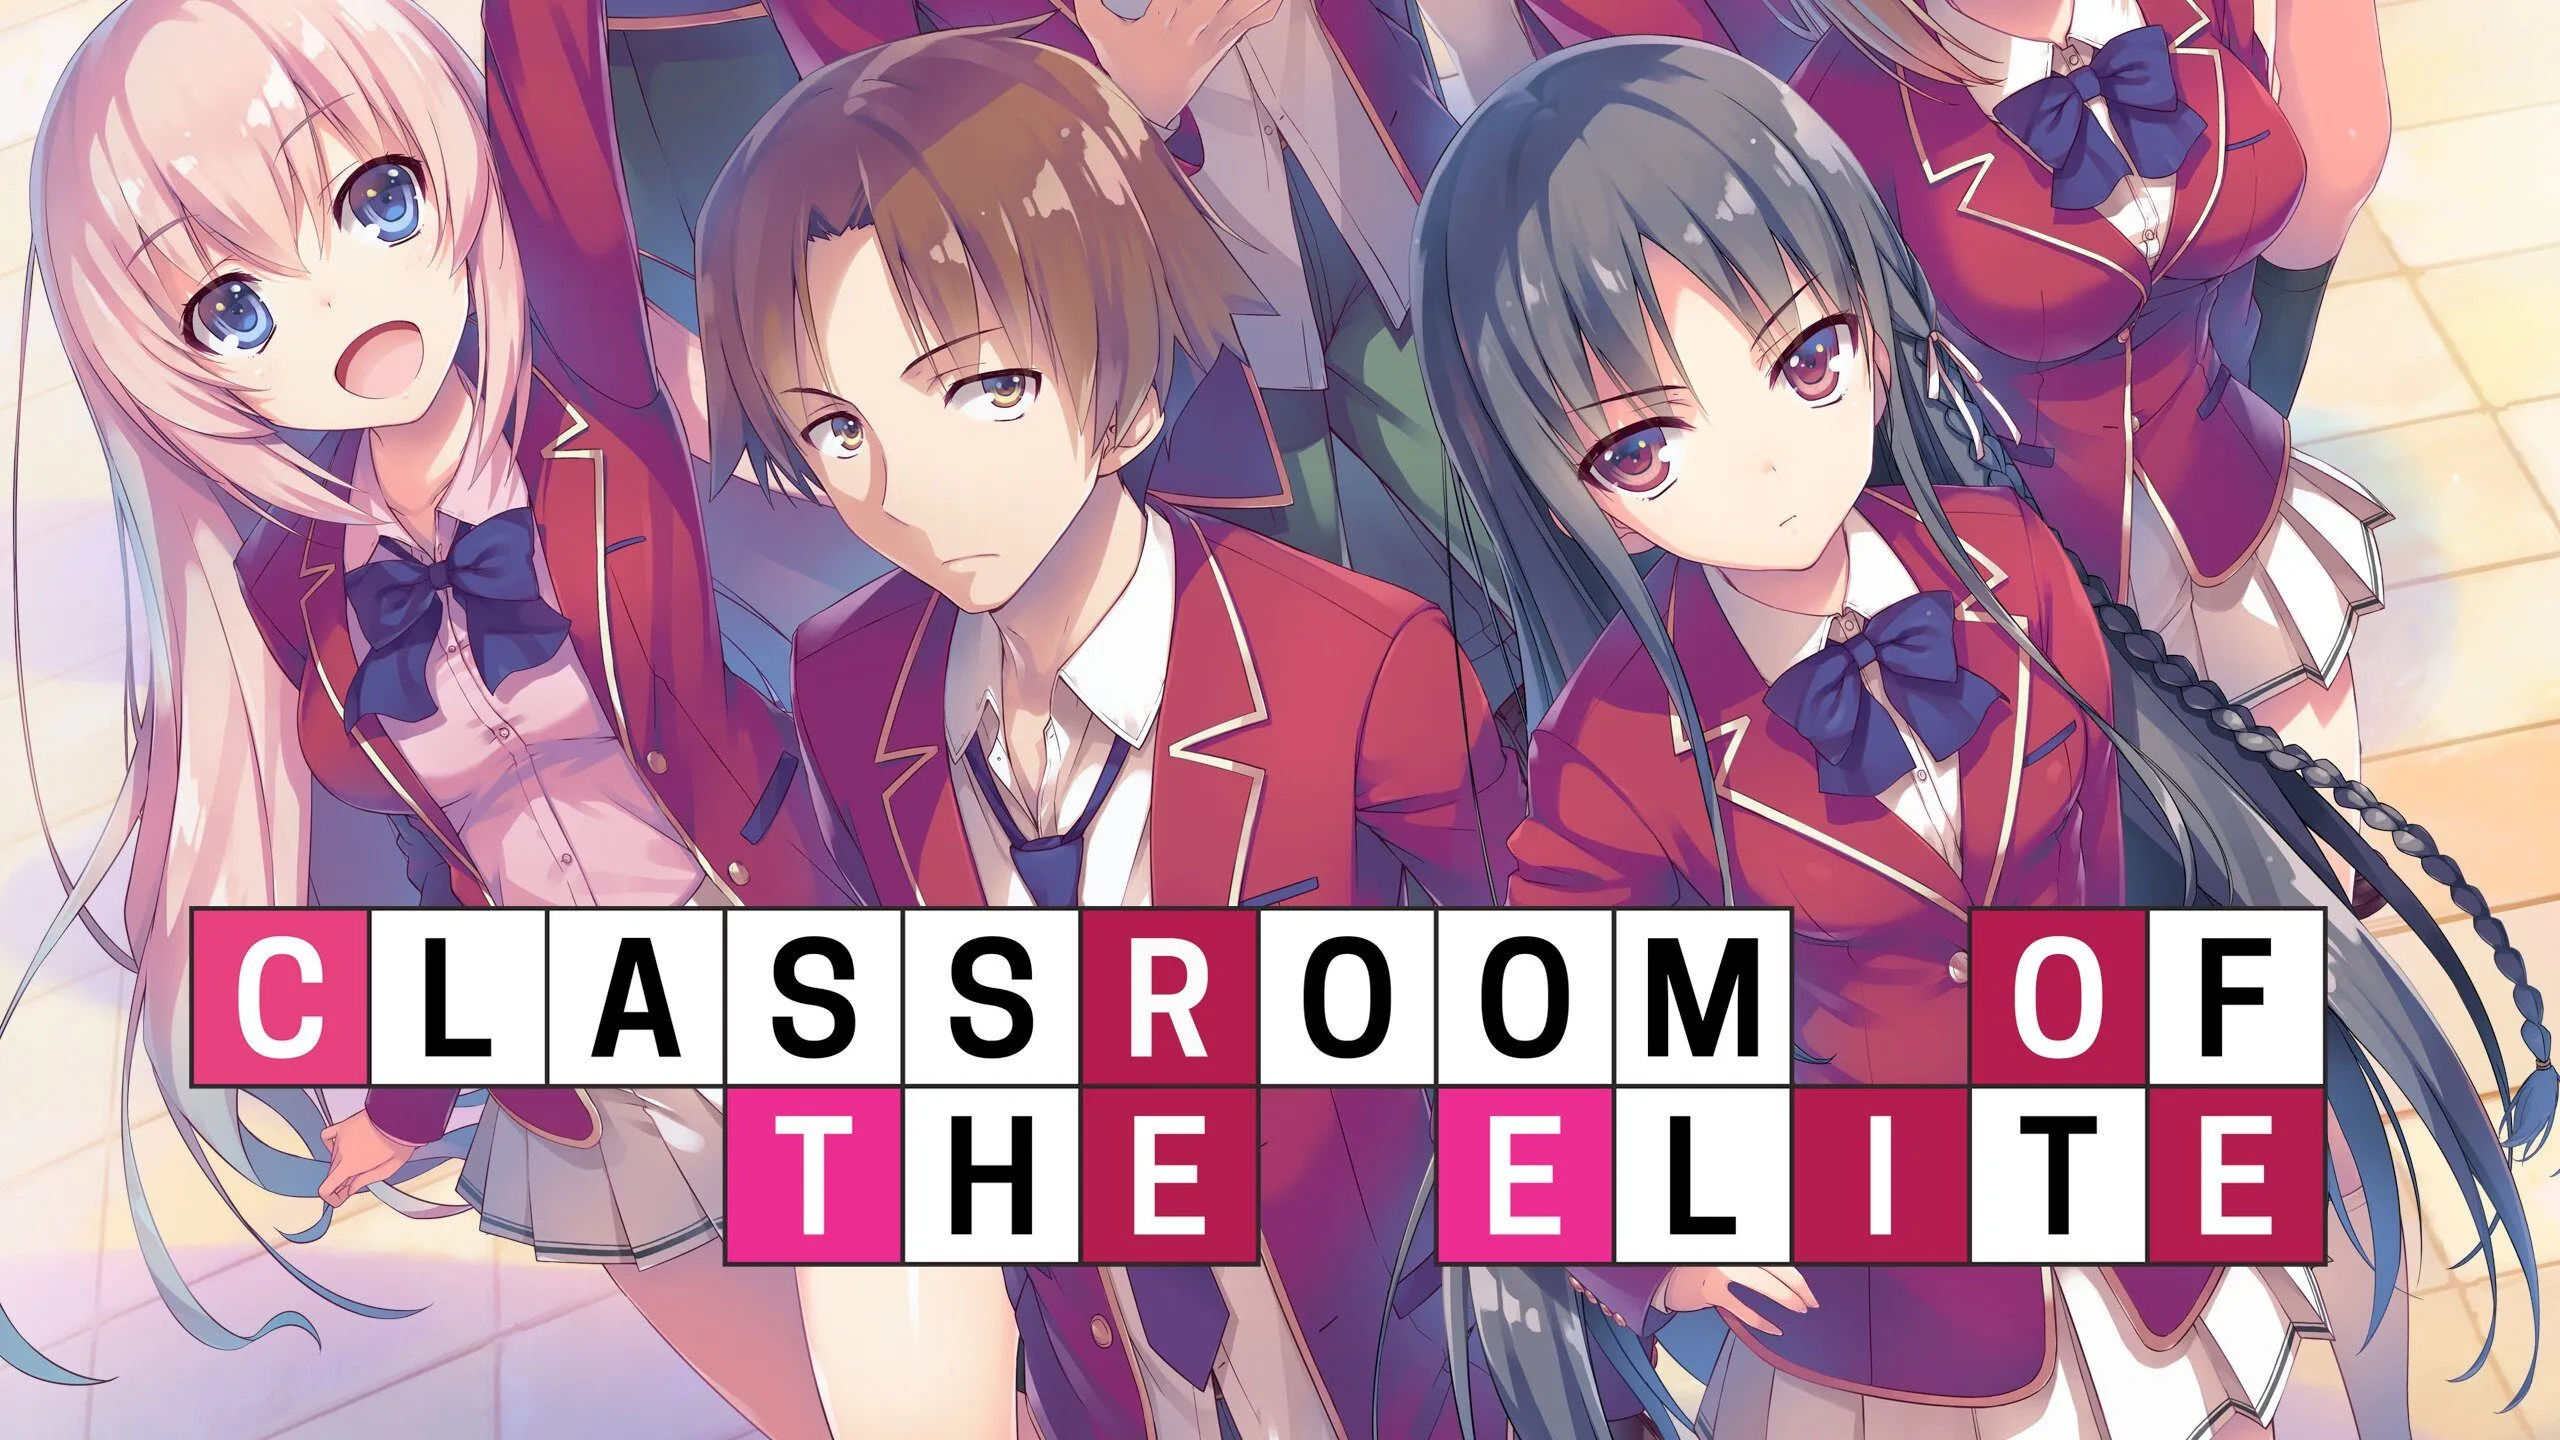 Where Can I Watch Classroom of the Elite?